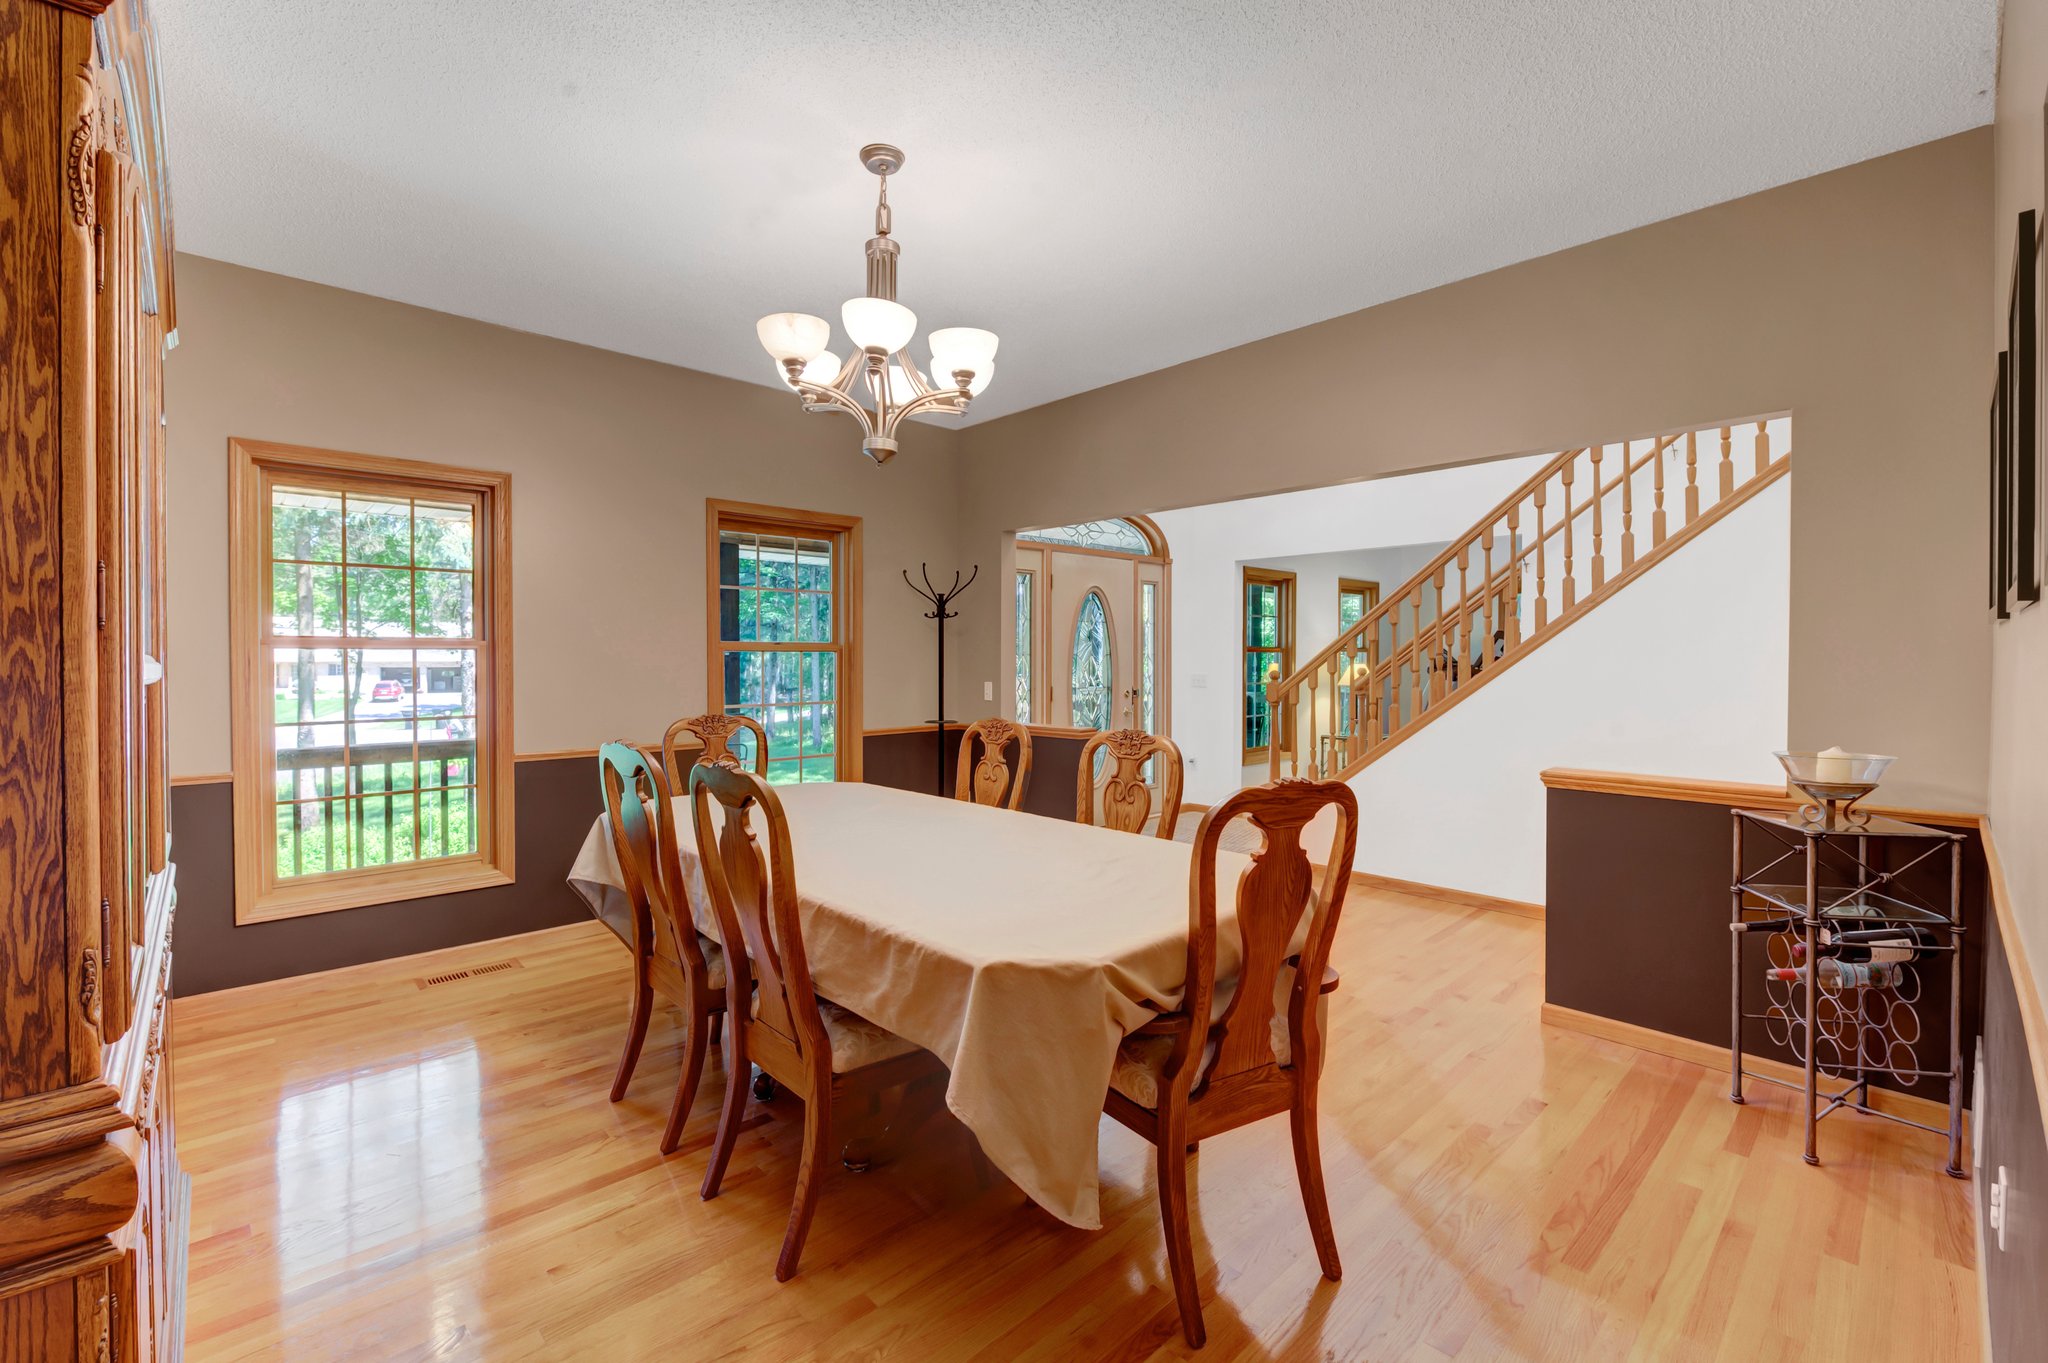 Spacious dining room to host those holiday gatherings